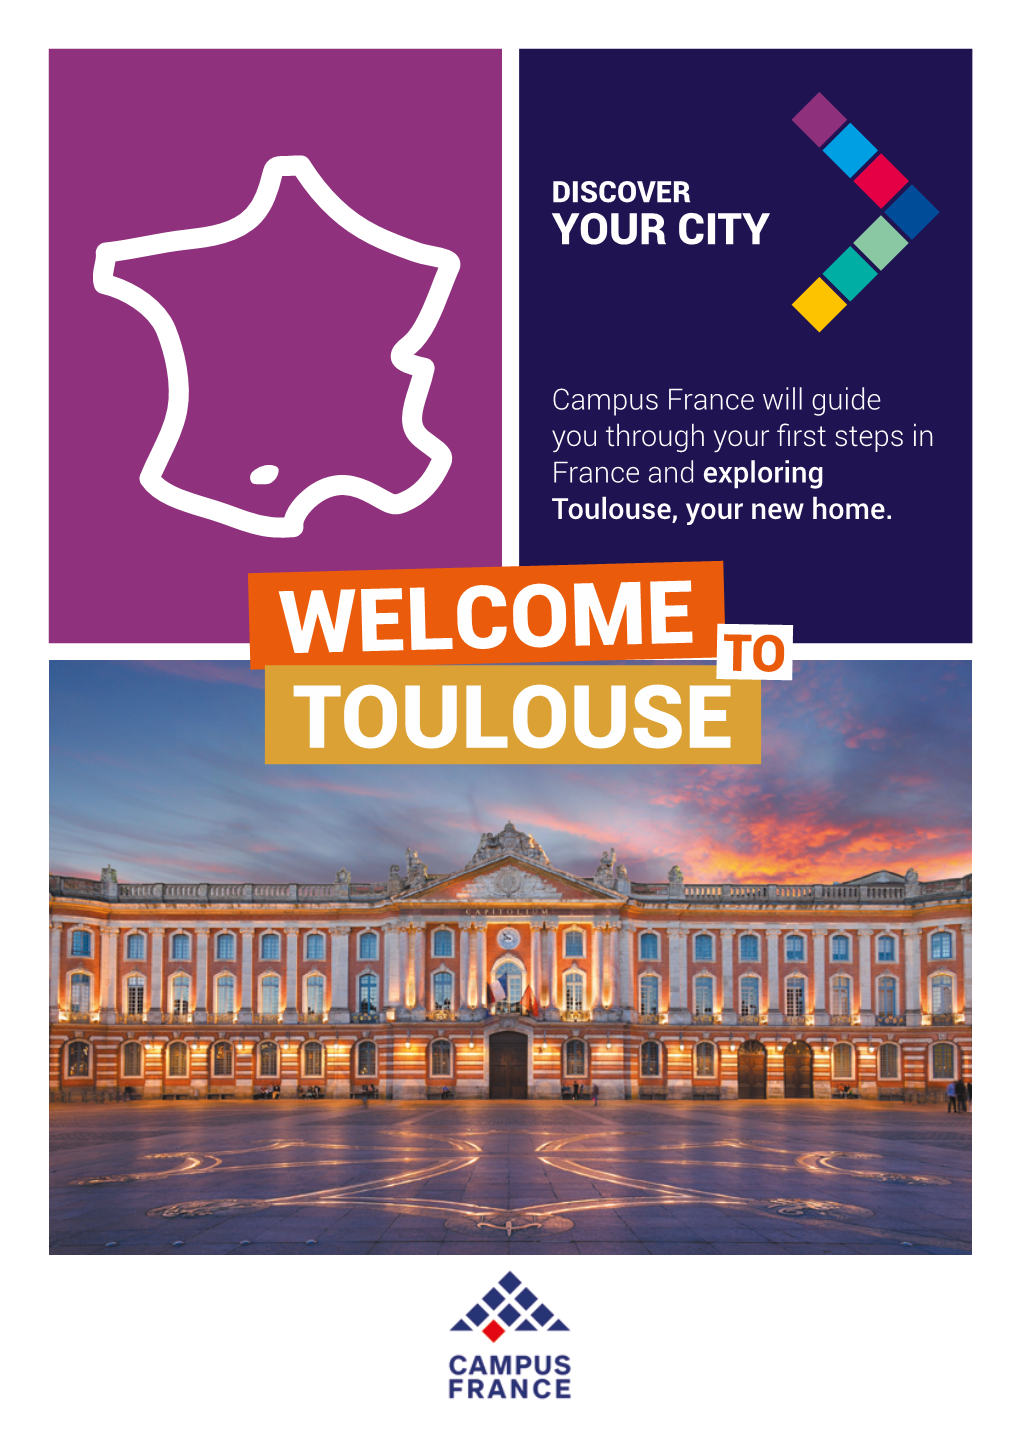 Toulouse, Your New Home